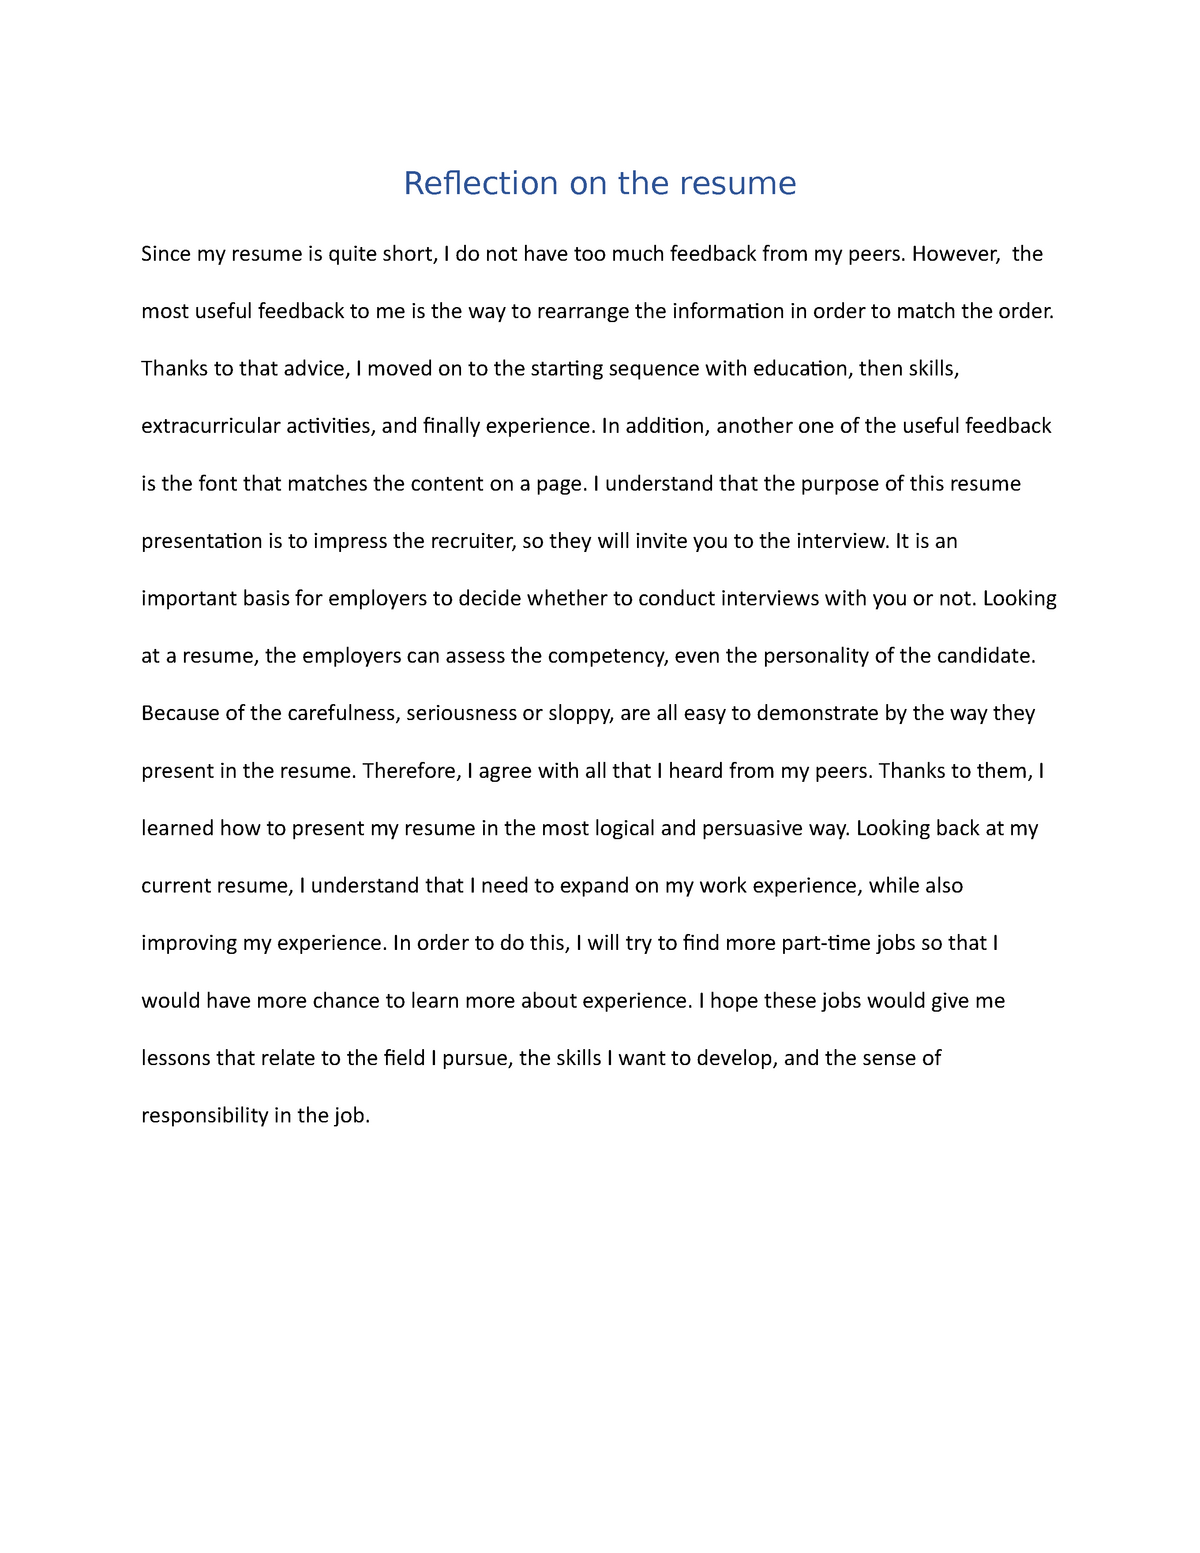 reflection paper about resume